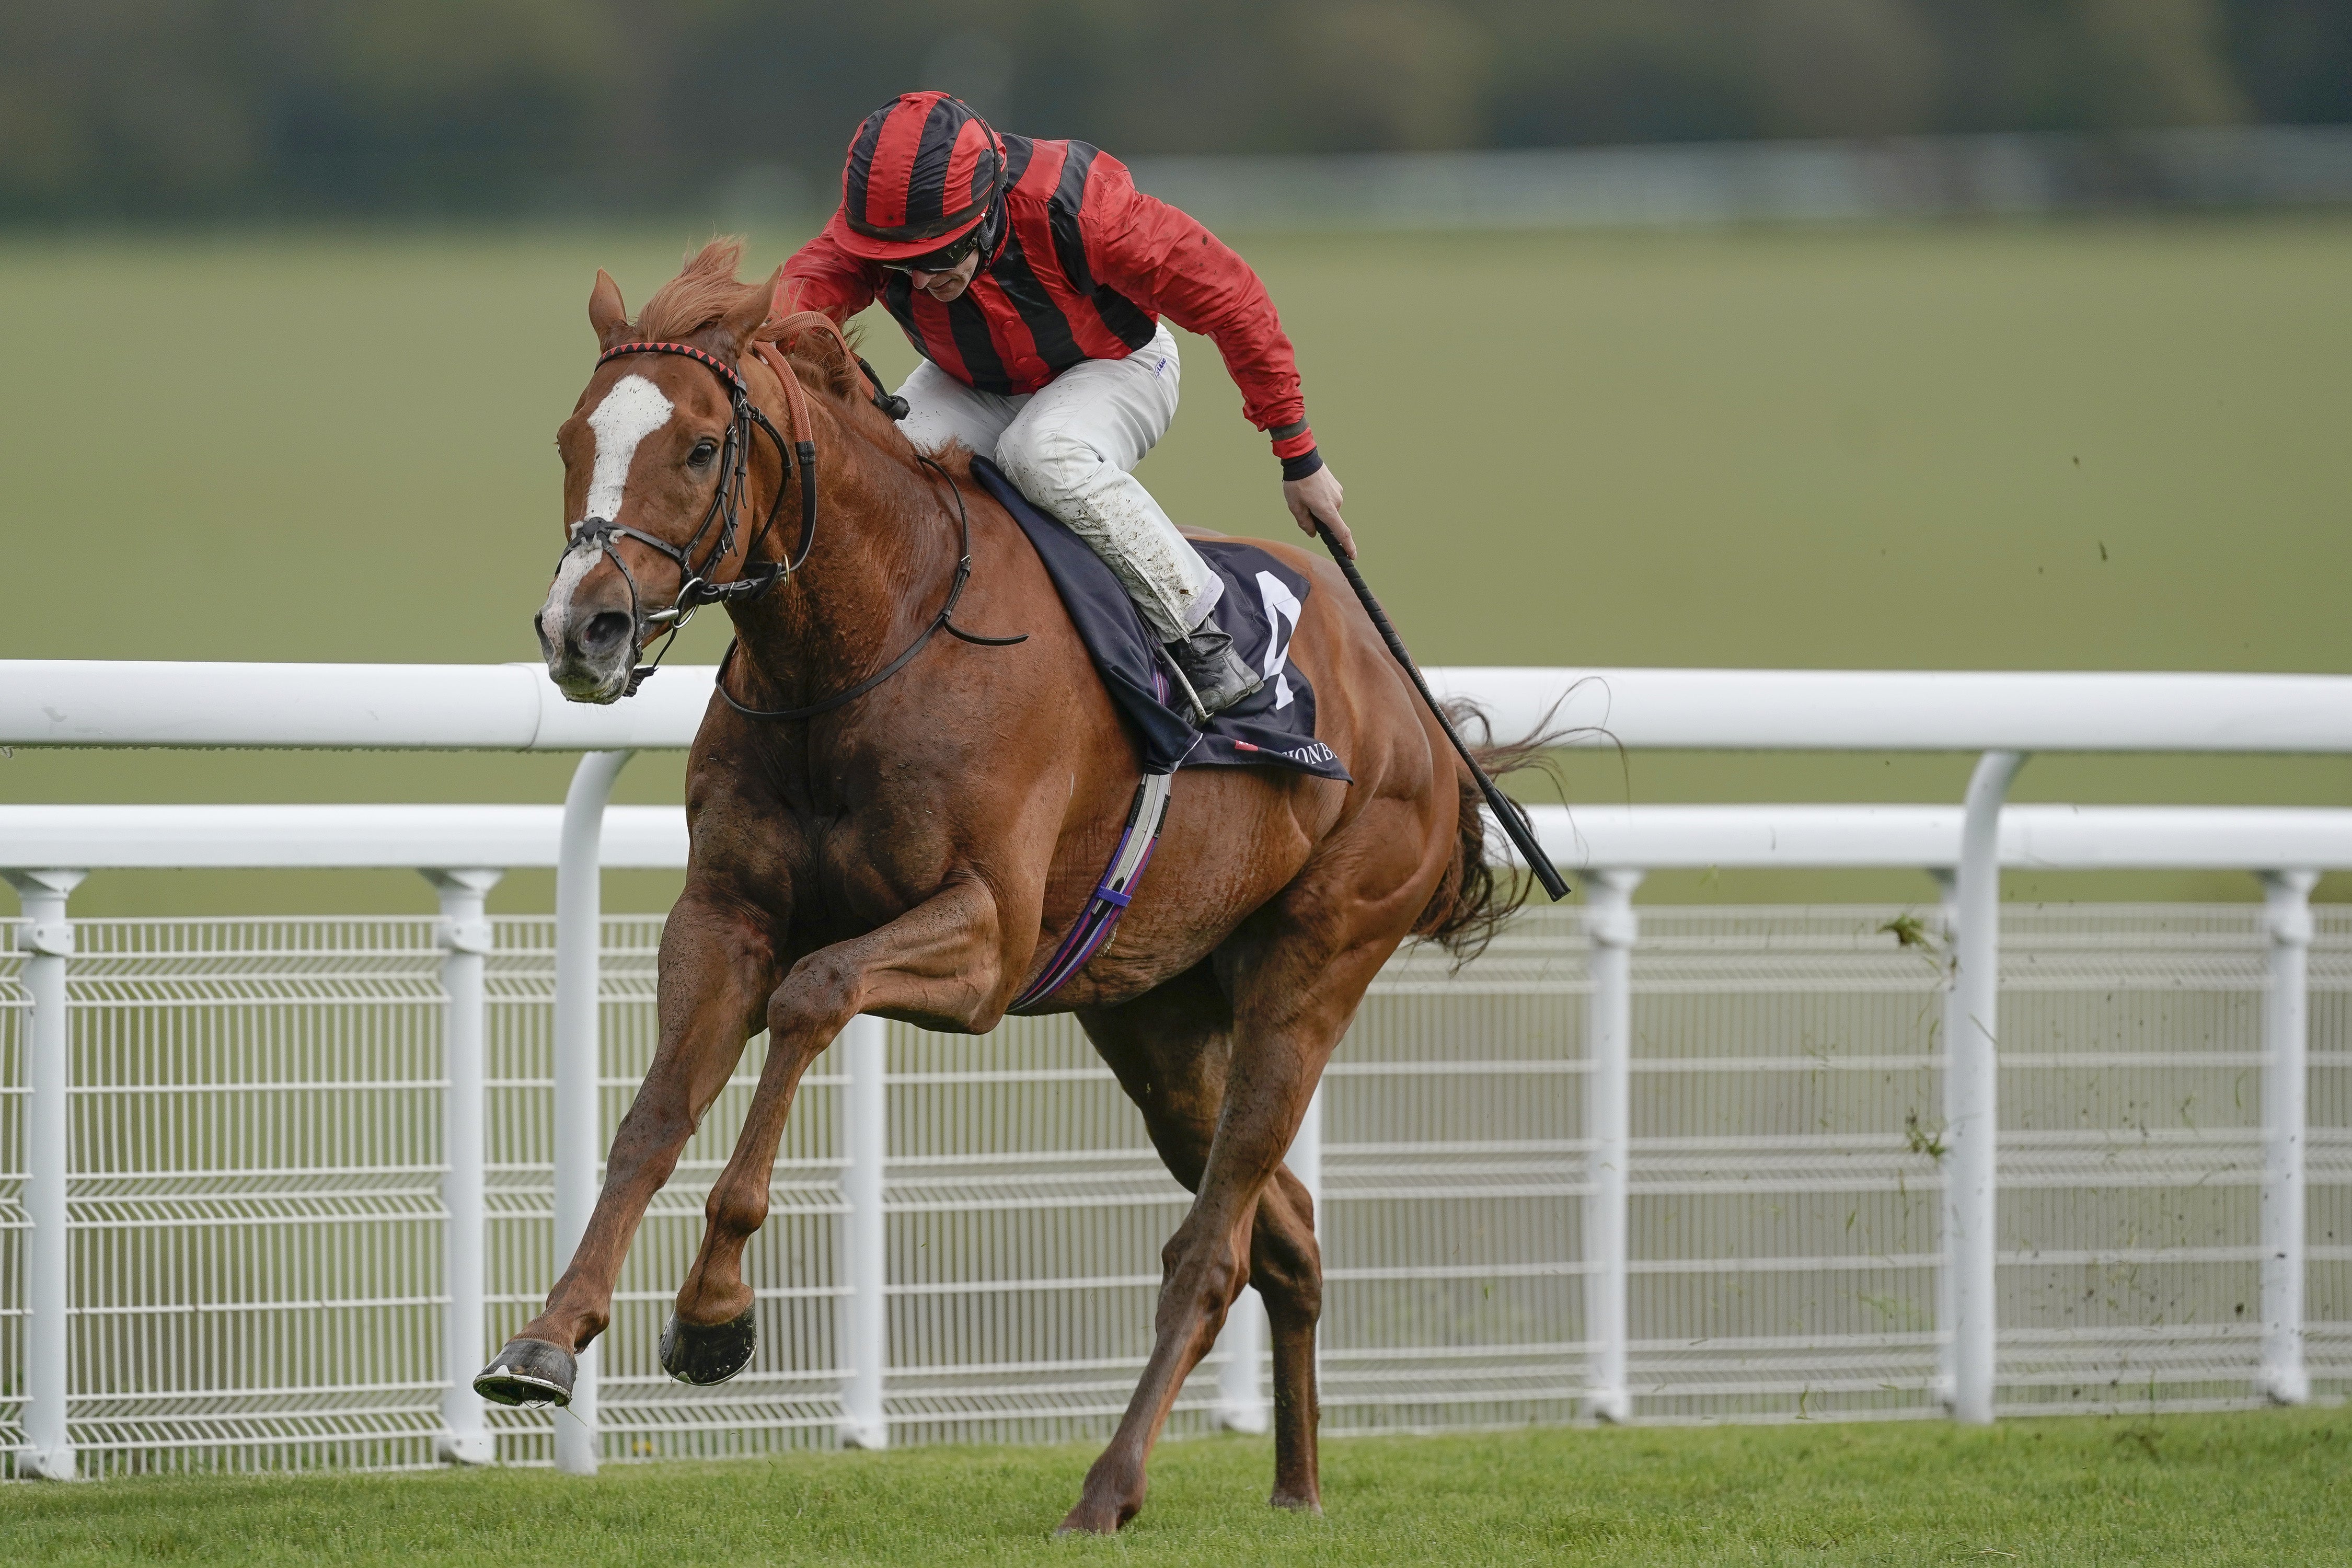 Goodwood Races – Saturday May 22nd